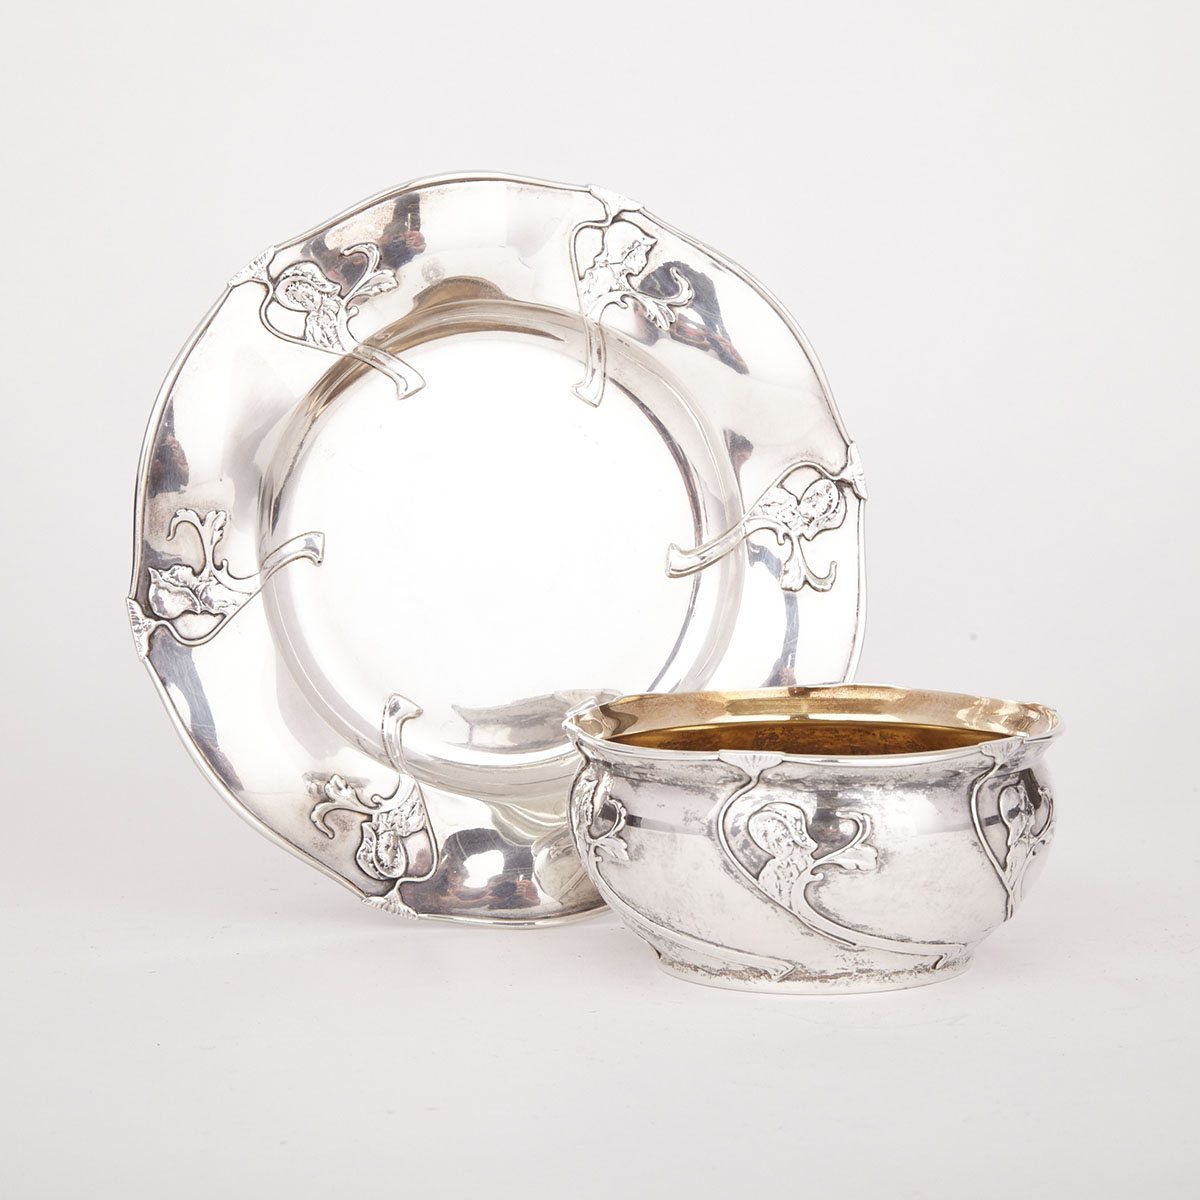 American Art Nouveau Silver Bowl and Stand, Gorham Mfg. Co., Providence, R.I., c.1900